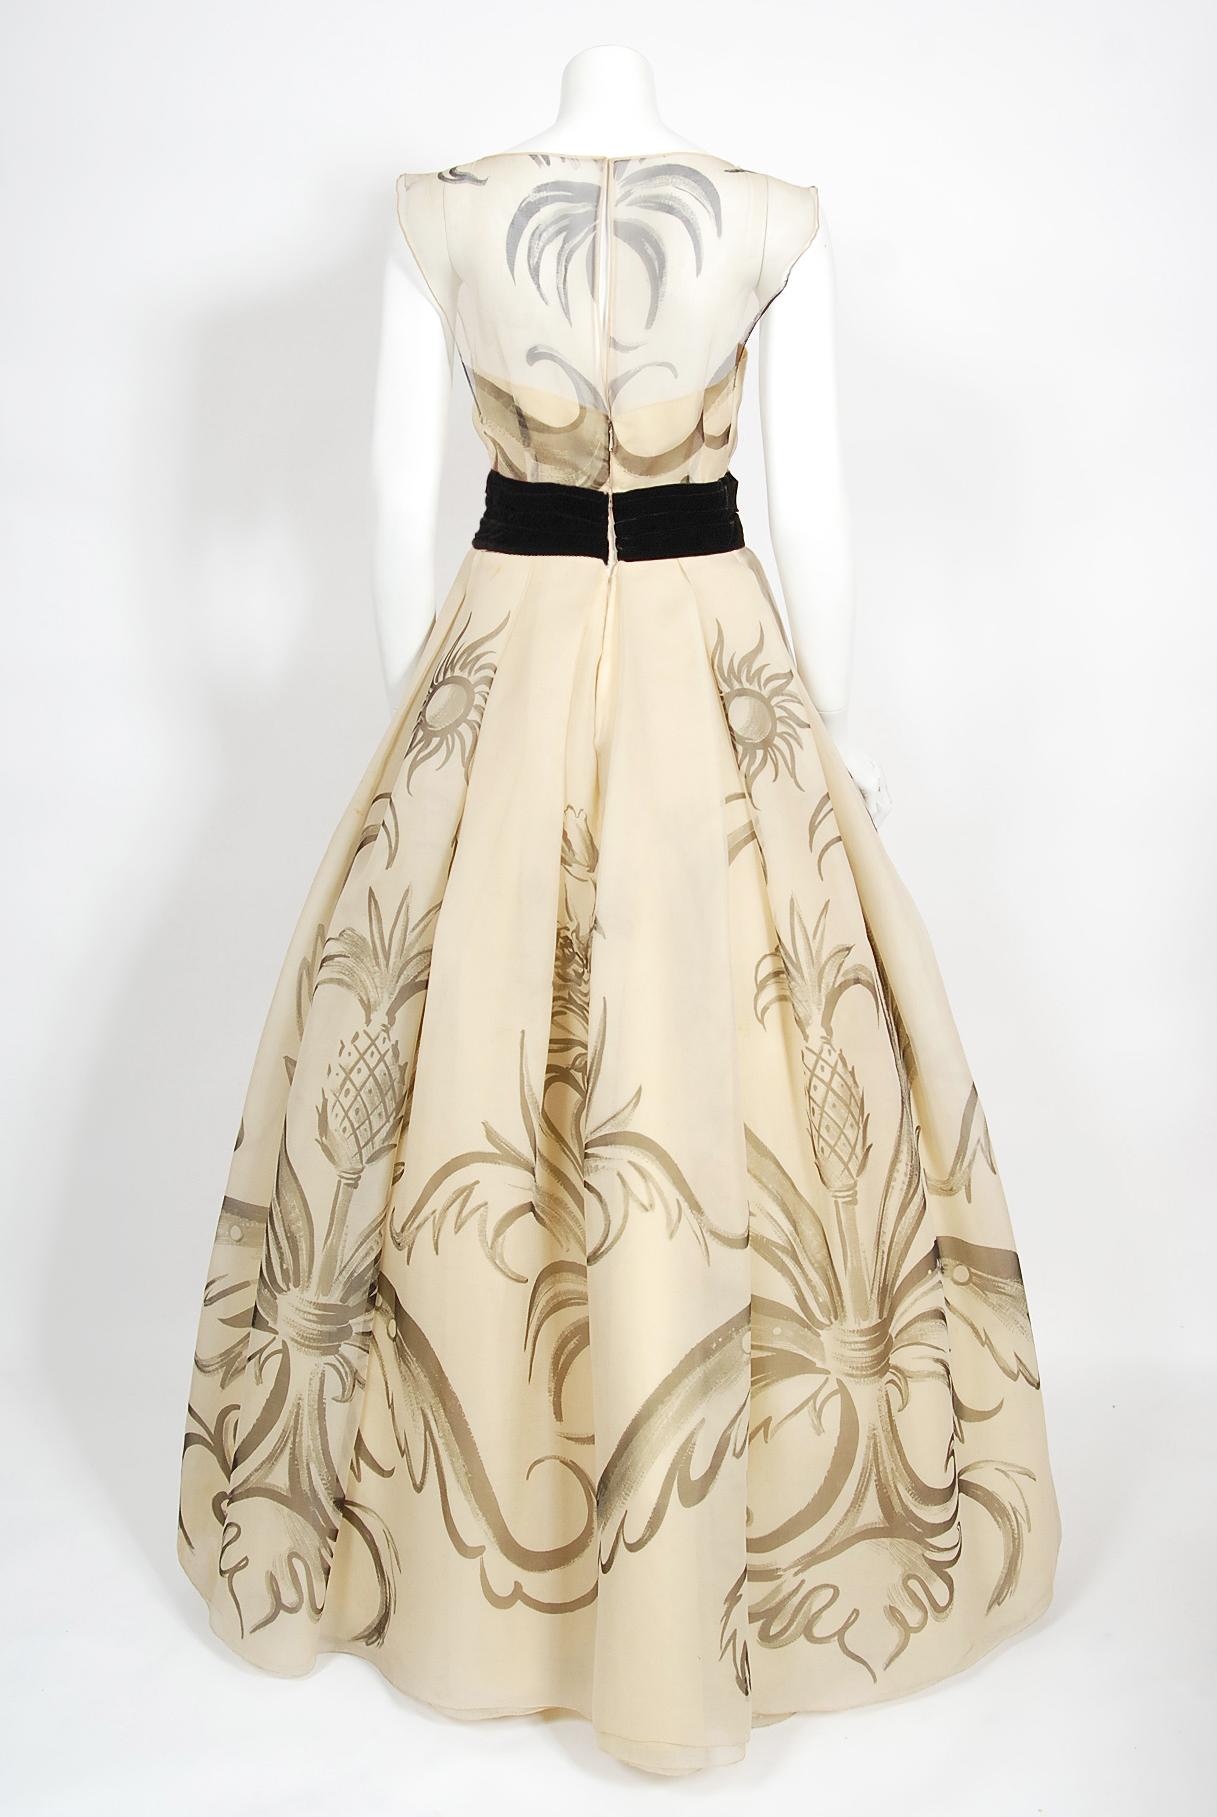 Vintage 1950's Hattie Carnegie Couture Whimsical Hand-Painted Cream Silk Gown  6